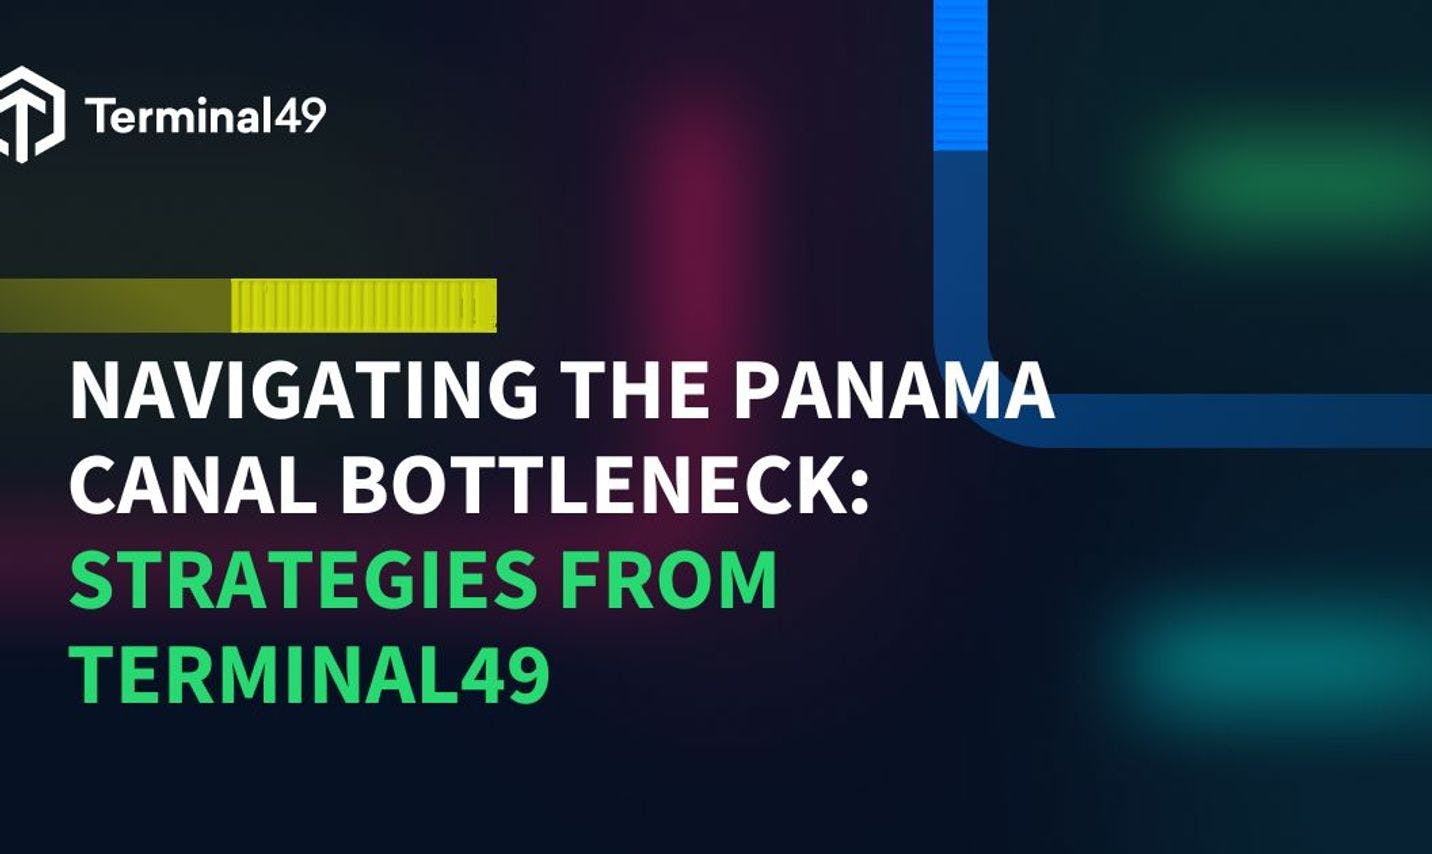 Navigating the Panama Canal Bottleneck: Strategies from Terminal49